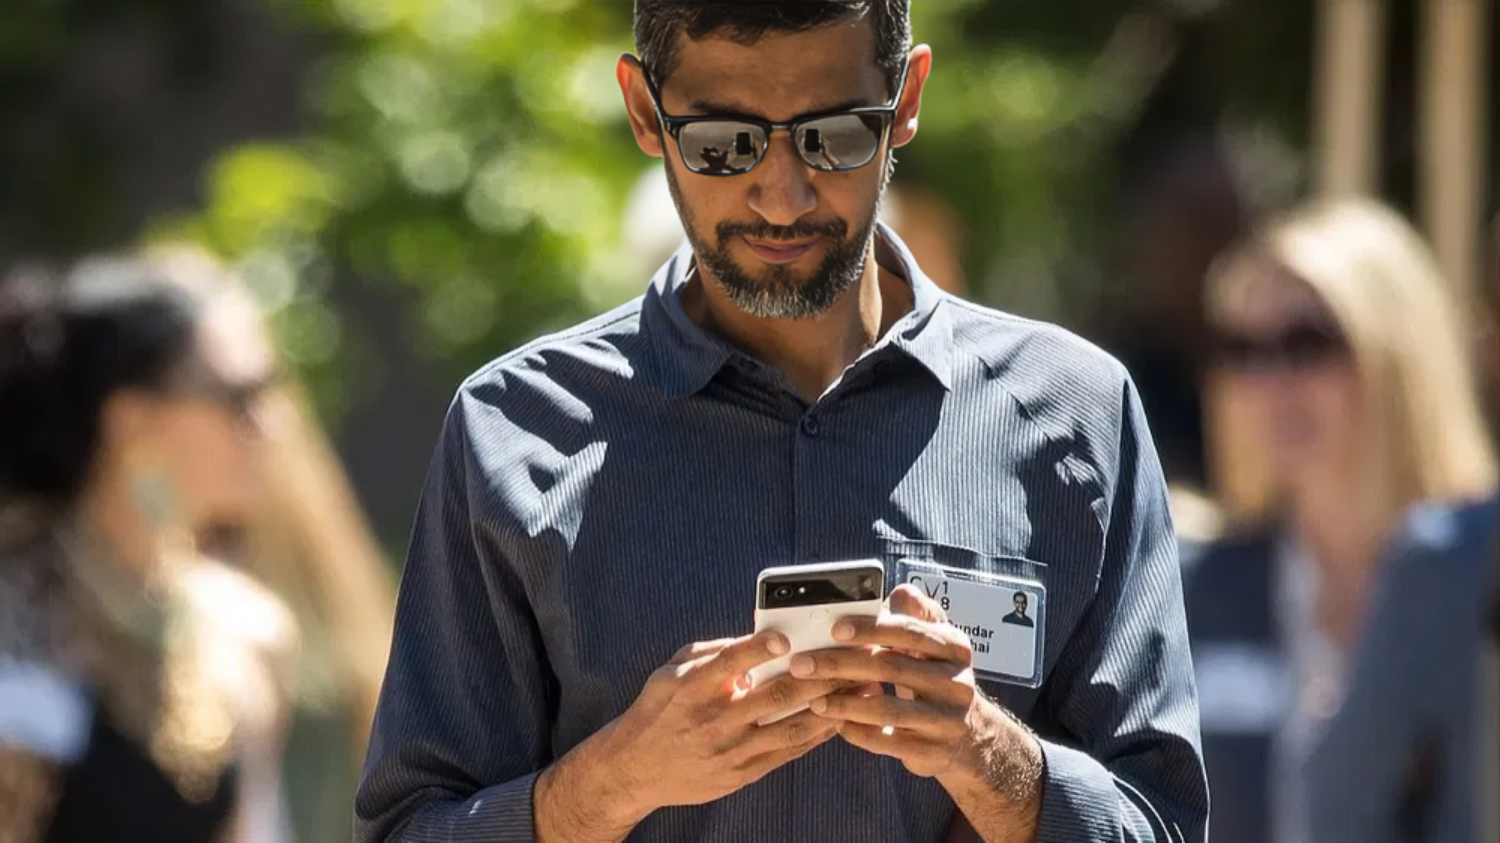 Picture of One, not two Google CEO Sundar Pichai uses 20 smartphones, said reason